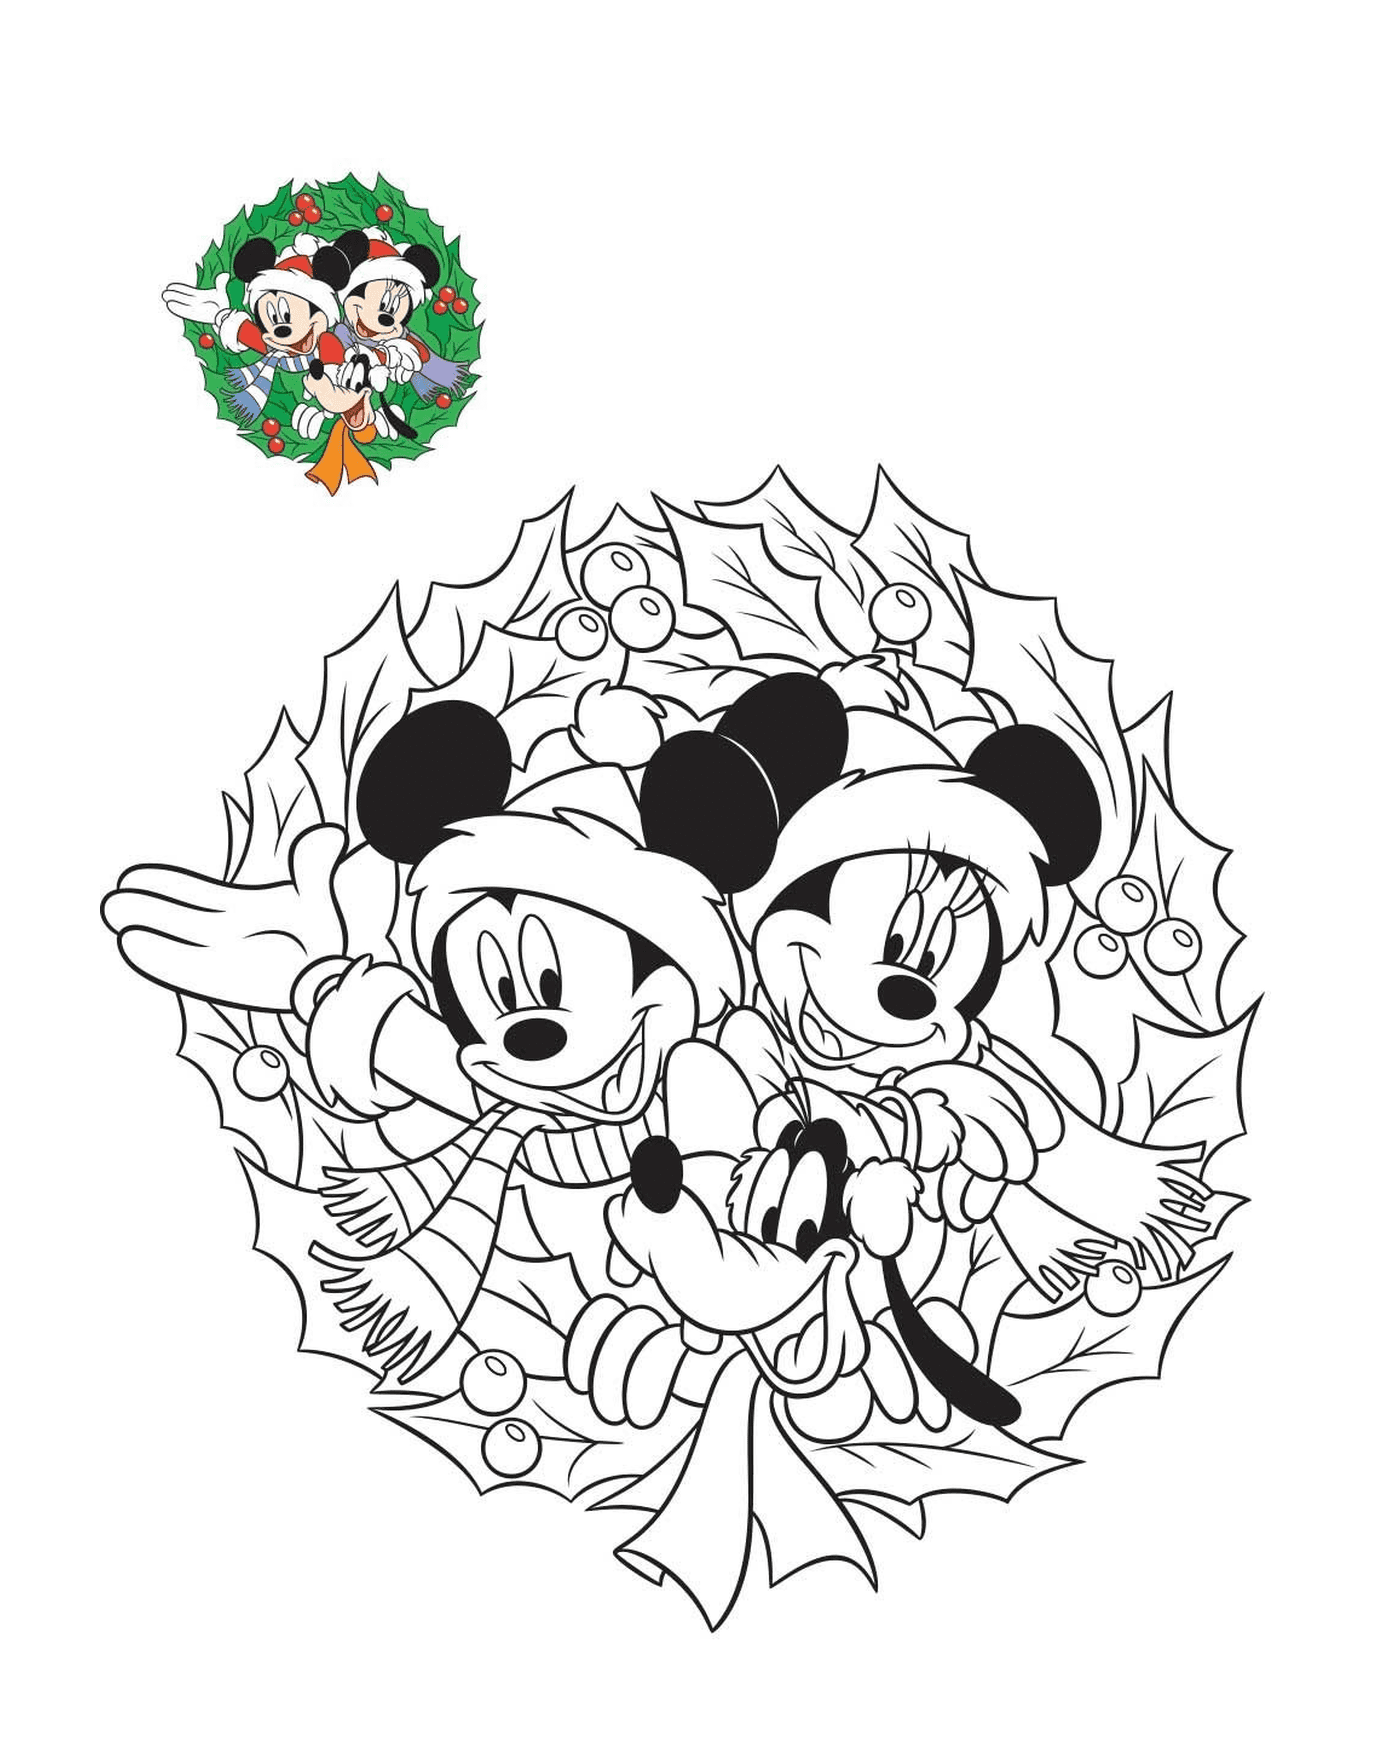  Mickey and Minnie in preparation 